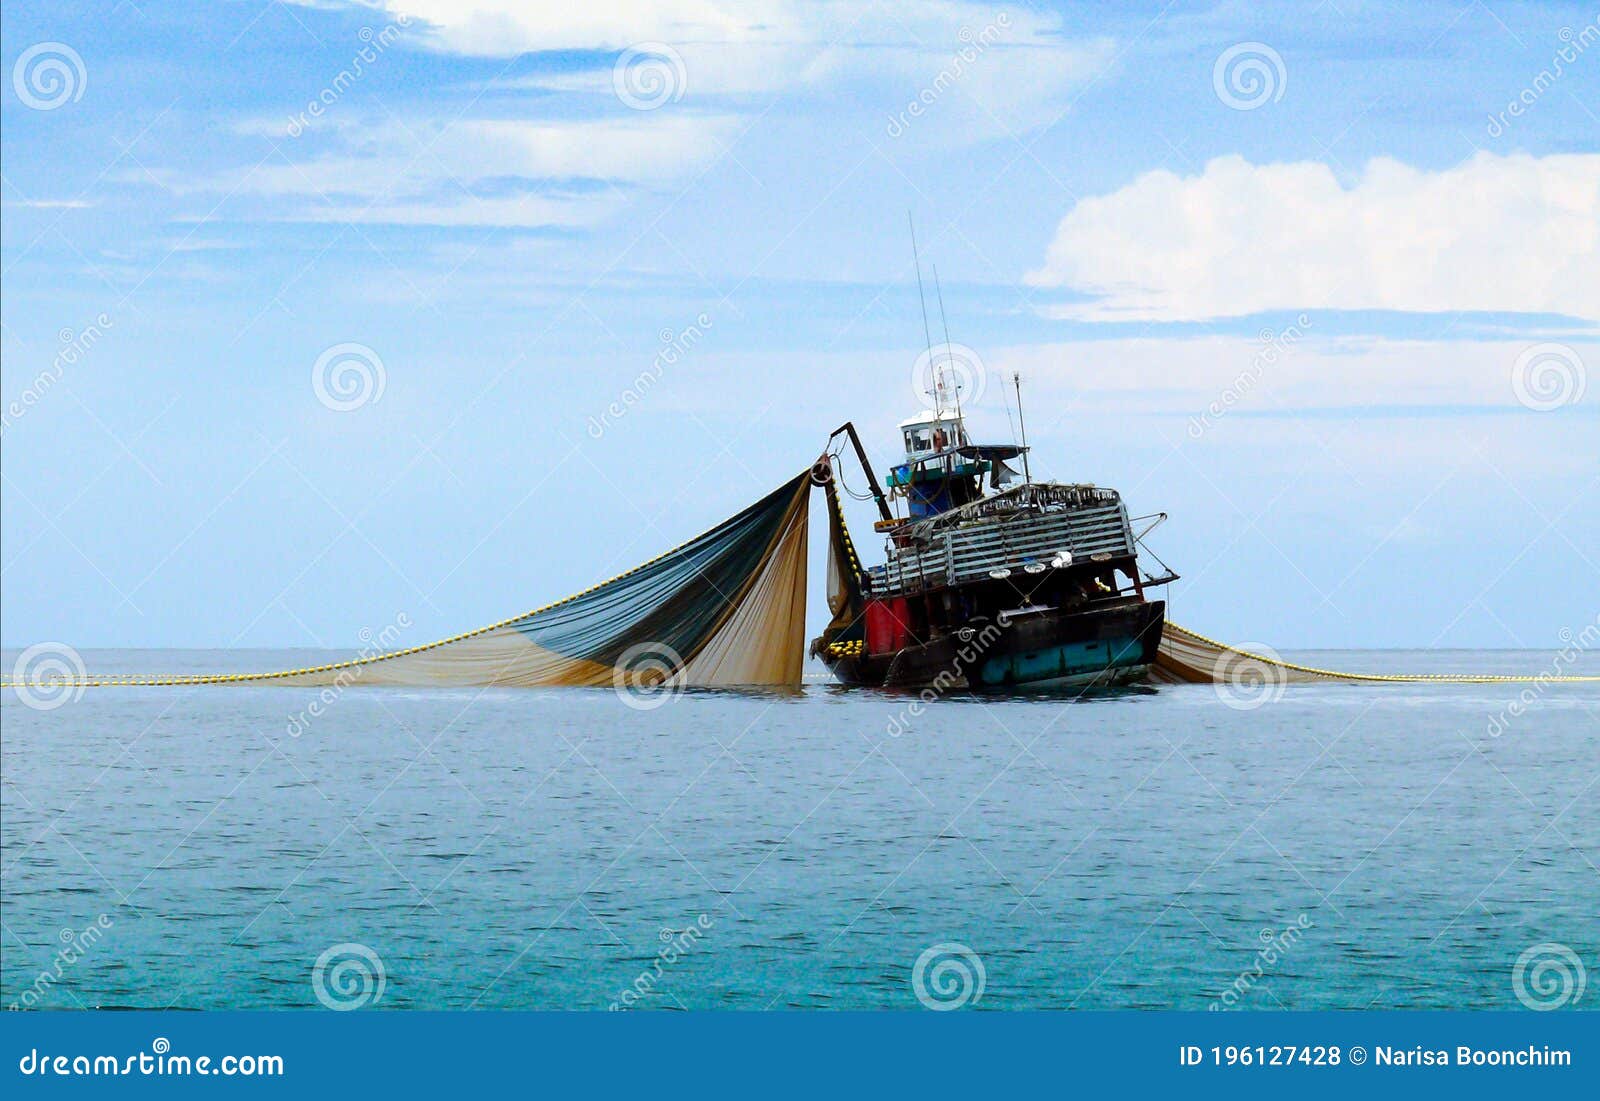 A Large Fishing Boat in the Middle of the Sea. Stock Photo - Image of  profession, fishing: 196127428